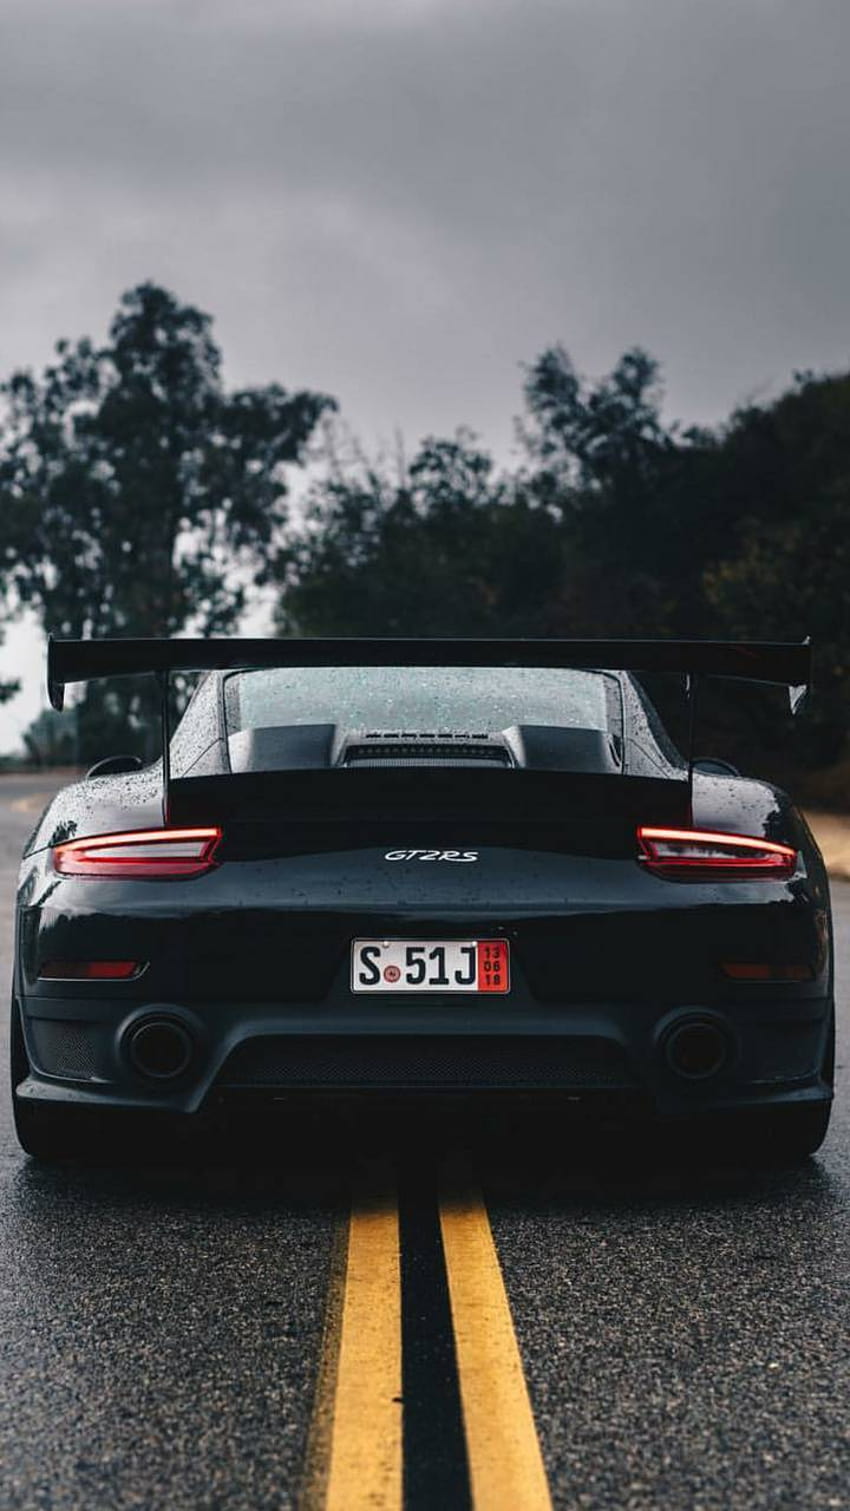 GT2 RS by AbdxllahM, ポルシェ gt2 rs iphone HD電話の壁紙